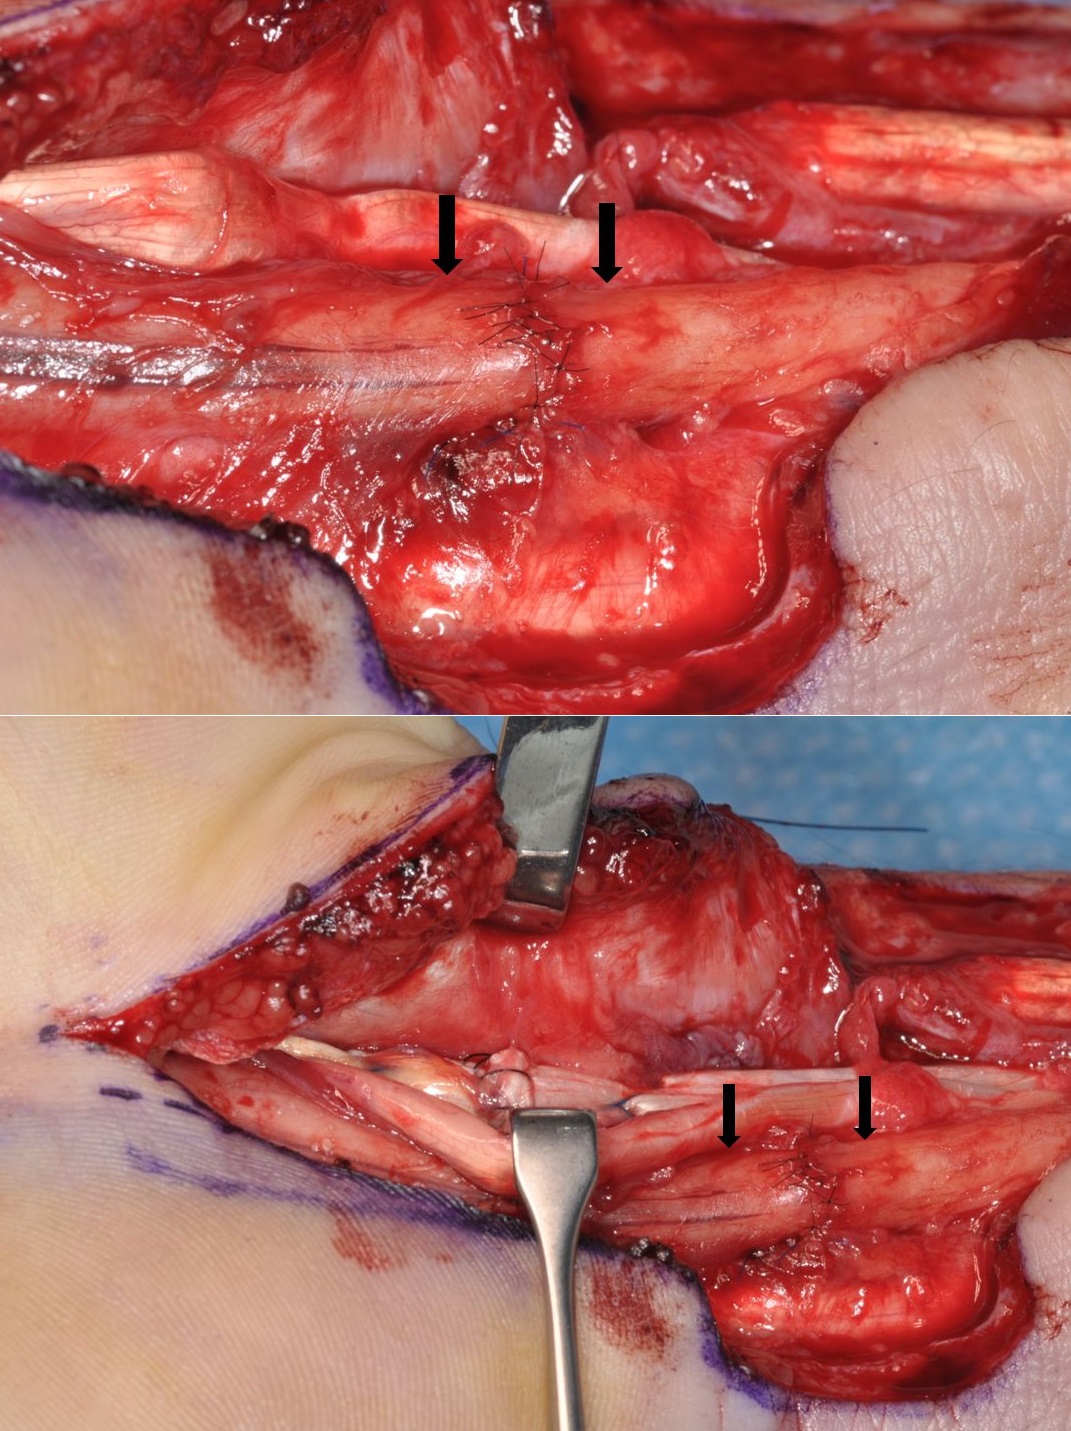 Suture repair of the median nerve at the wrist. 